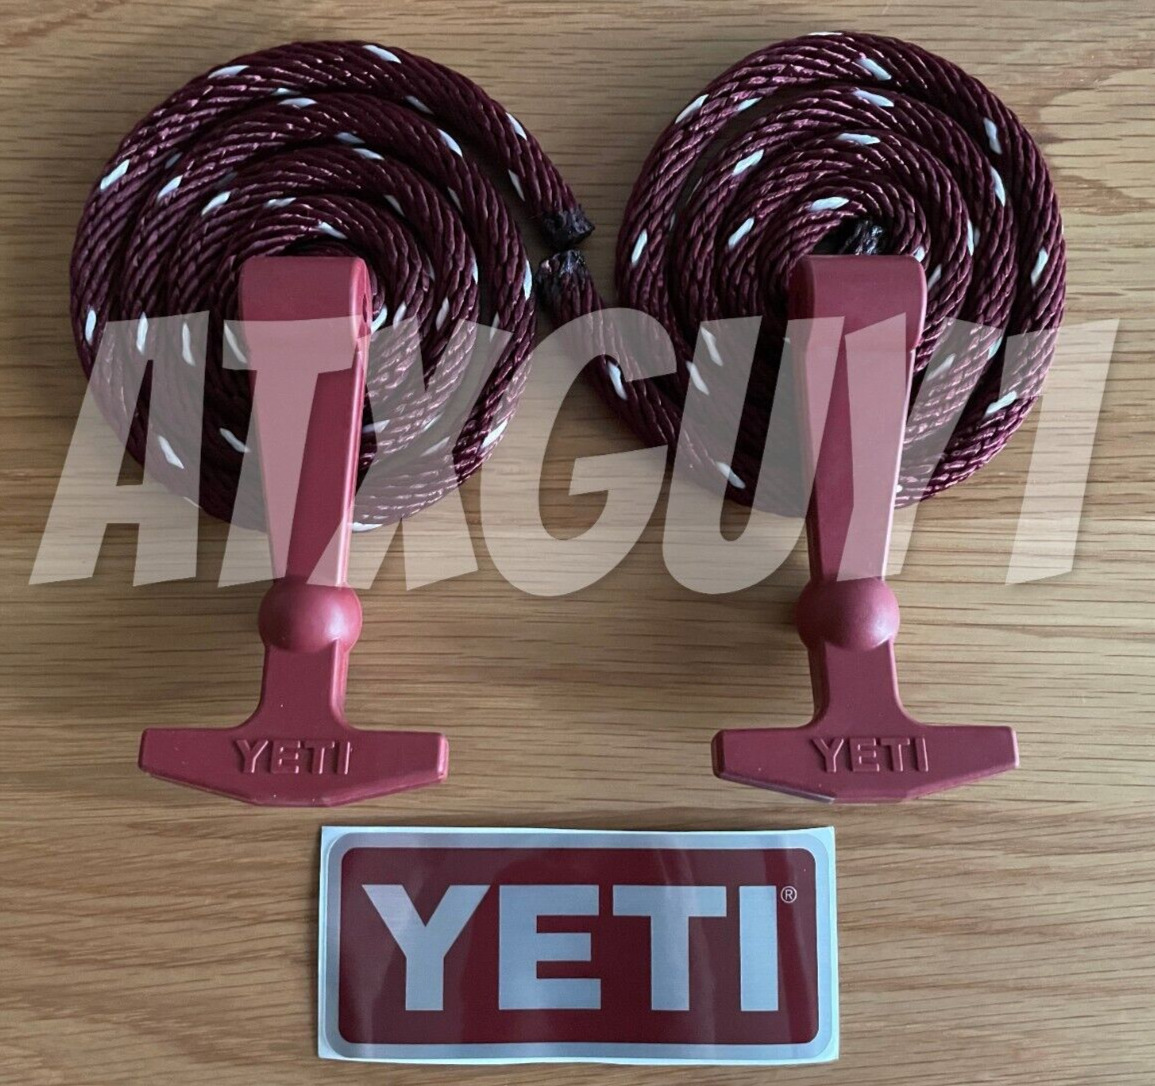 YETI Latch Kit -Maroon Burgandy - for Tundra Cooler - Rope, Latches, &  Sticker